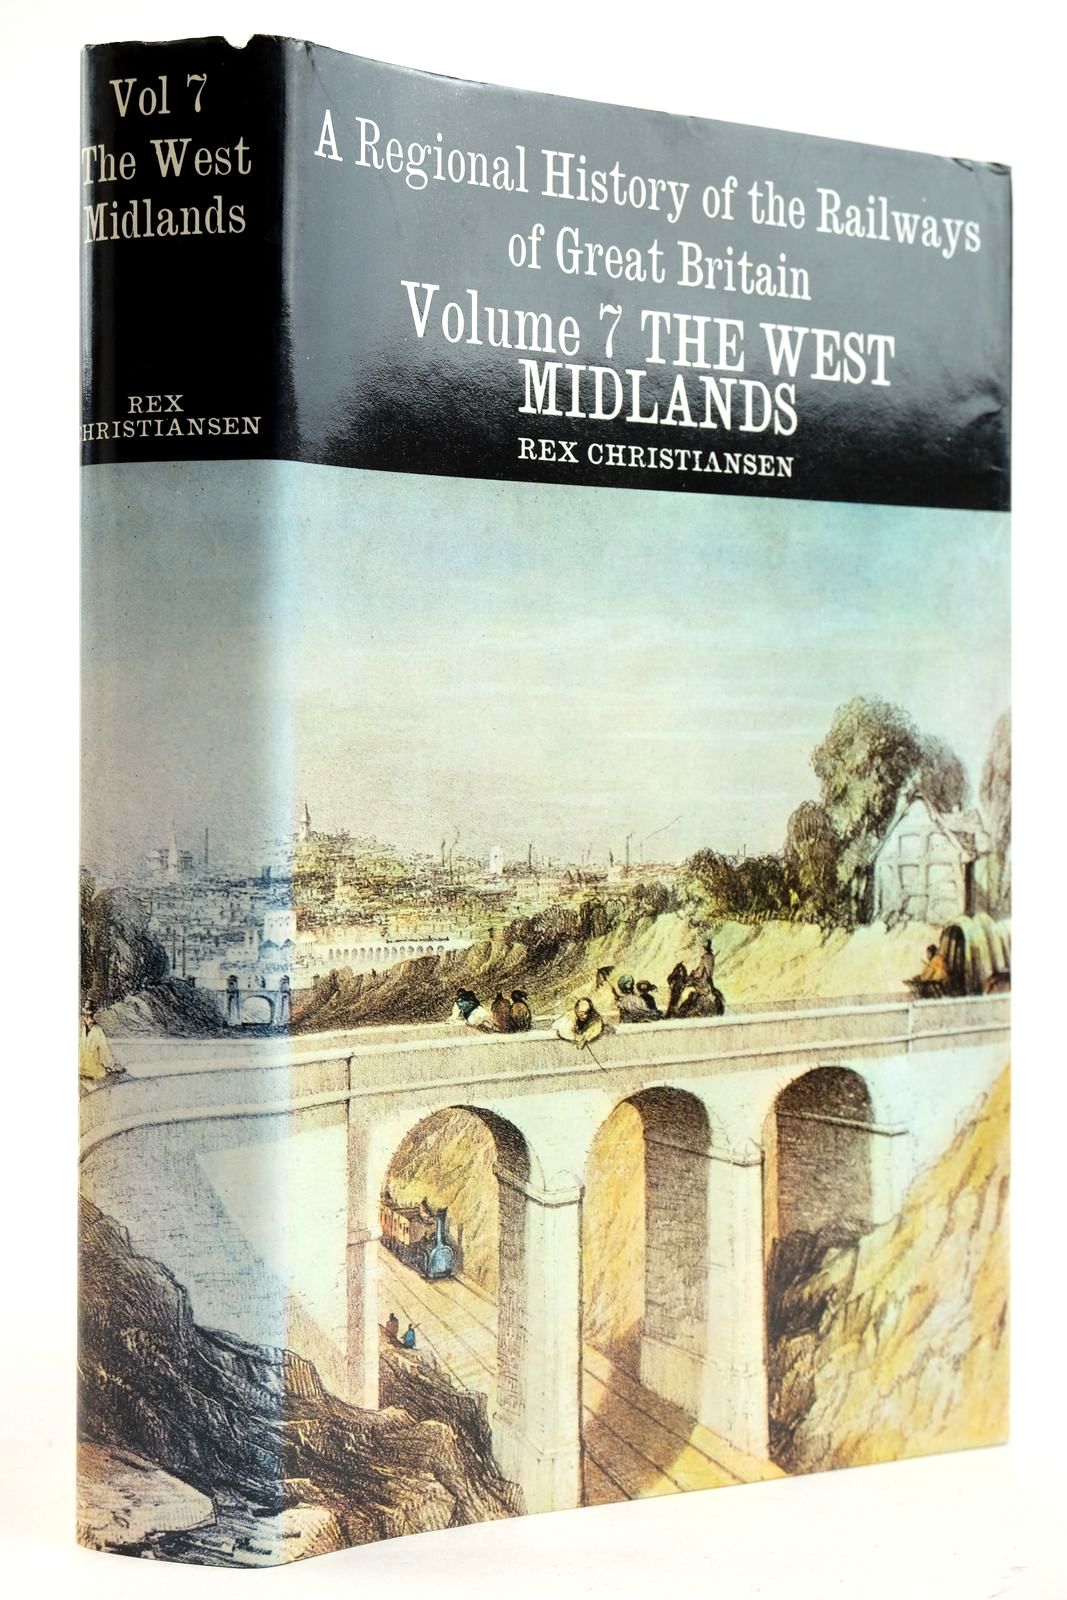 Photo of A REGIONAL HISTORY OF THE RAILWAYS OF GREAT BRITAIN VOLUME 7 THE WEST MIDLANDS written by Christiansen, Rex published by David St John Thomas, David &amp; Charles (STOCK CODE: 2133114)  for sale by Stella & Rose's Books